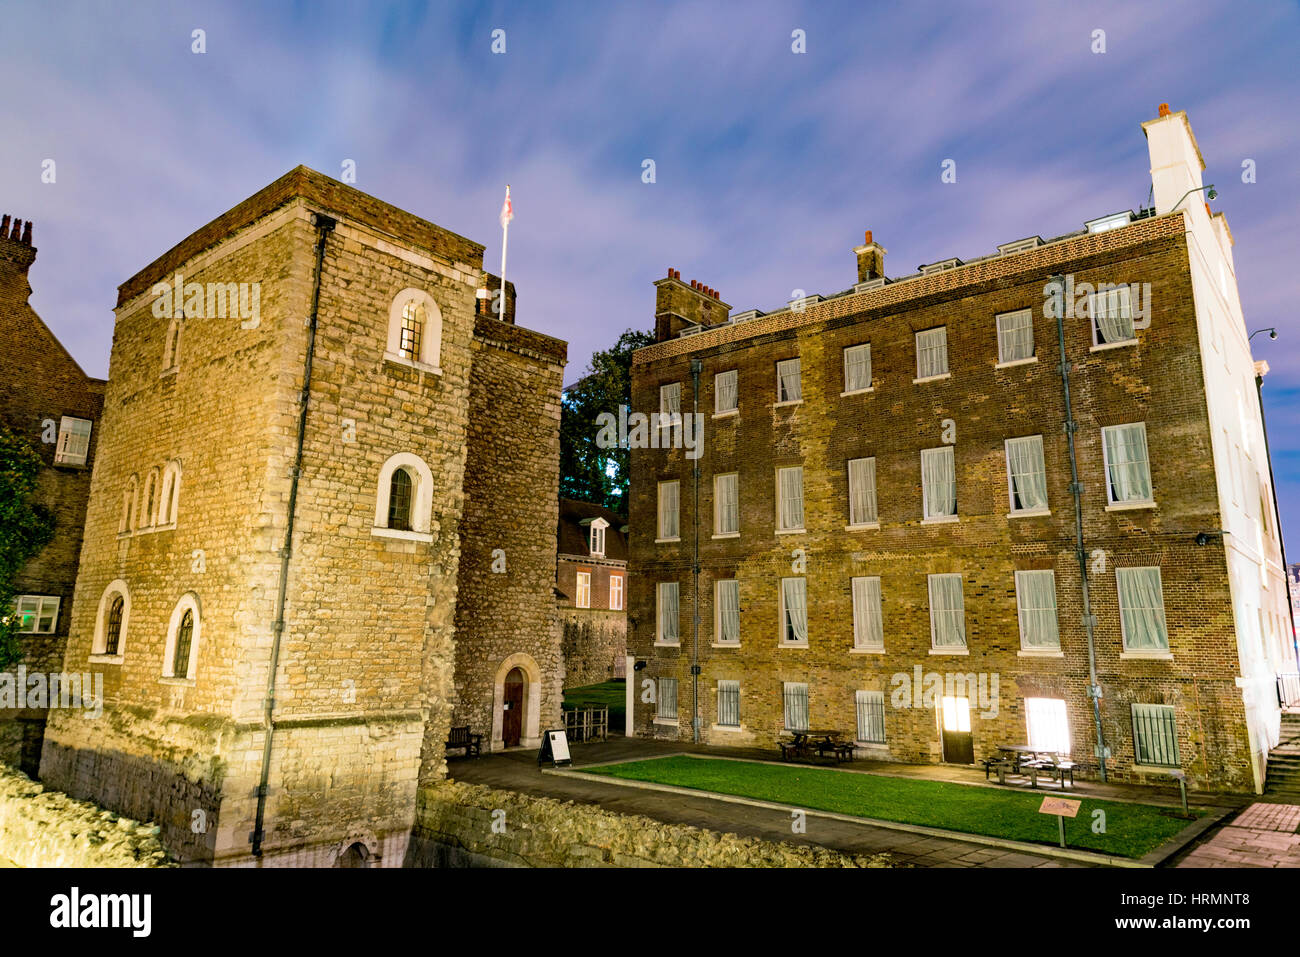 Jewel House in London at night Stock Photo